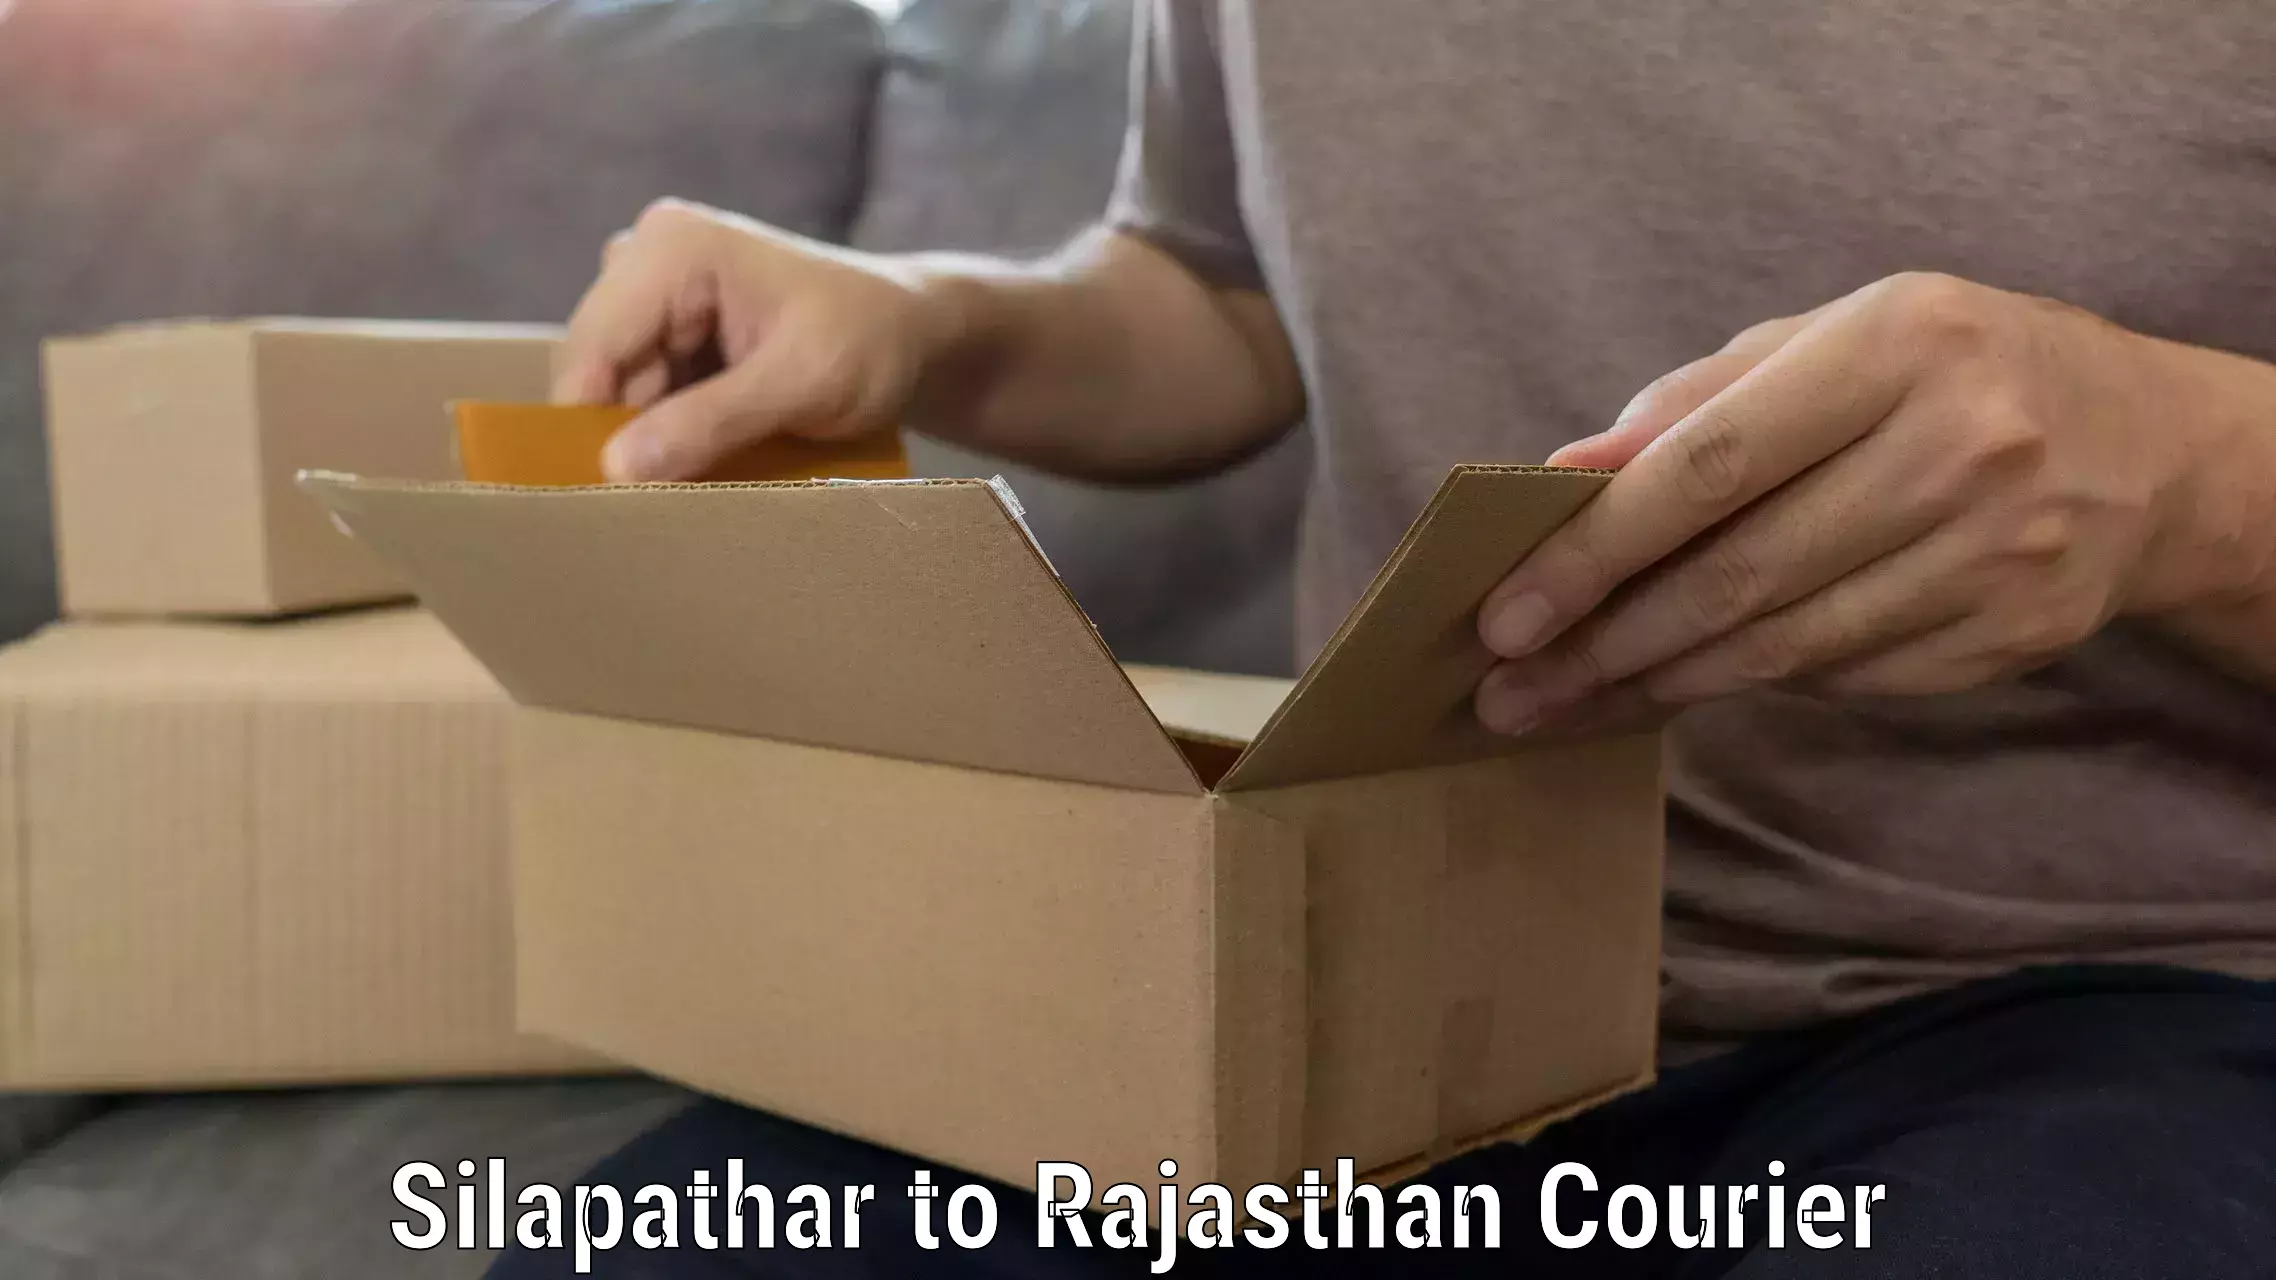 Trusted relocation experts Silapathar to Shahpura Jaipur